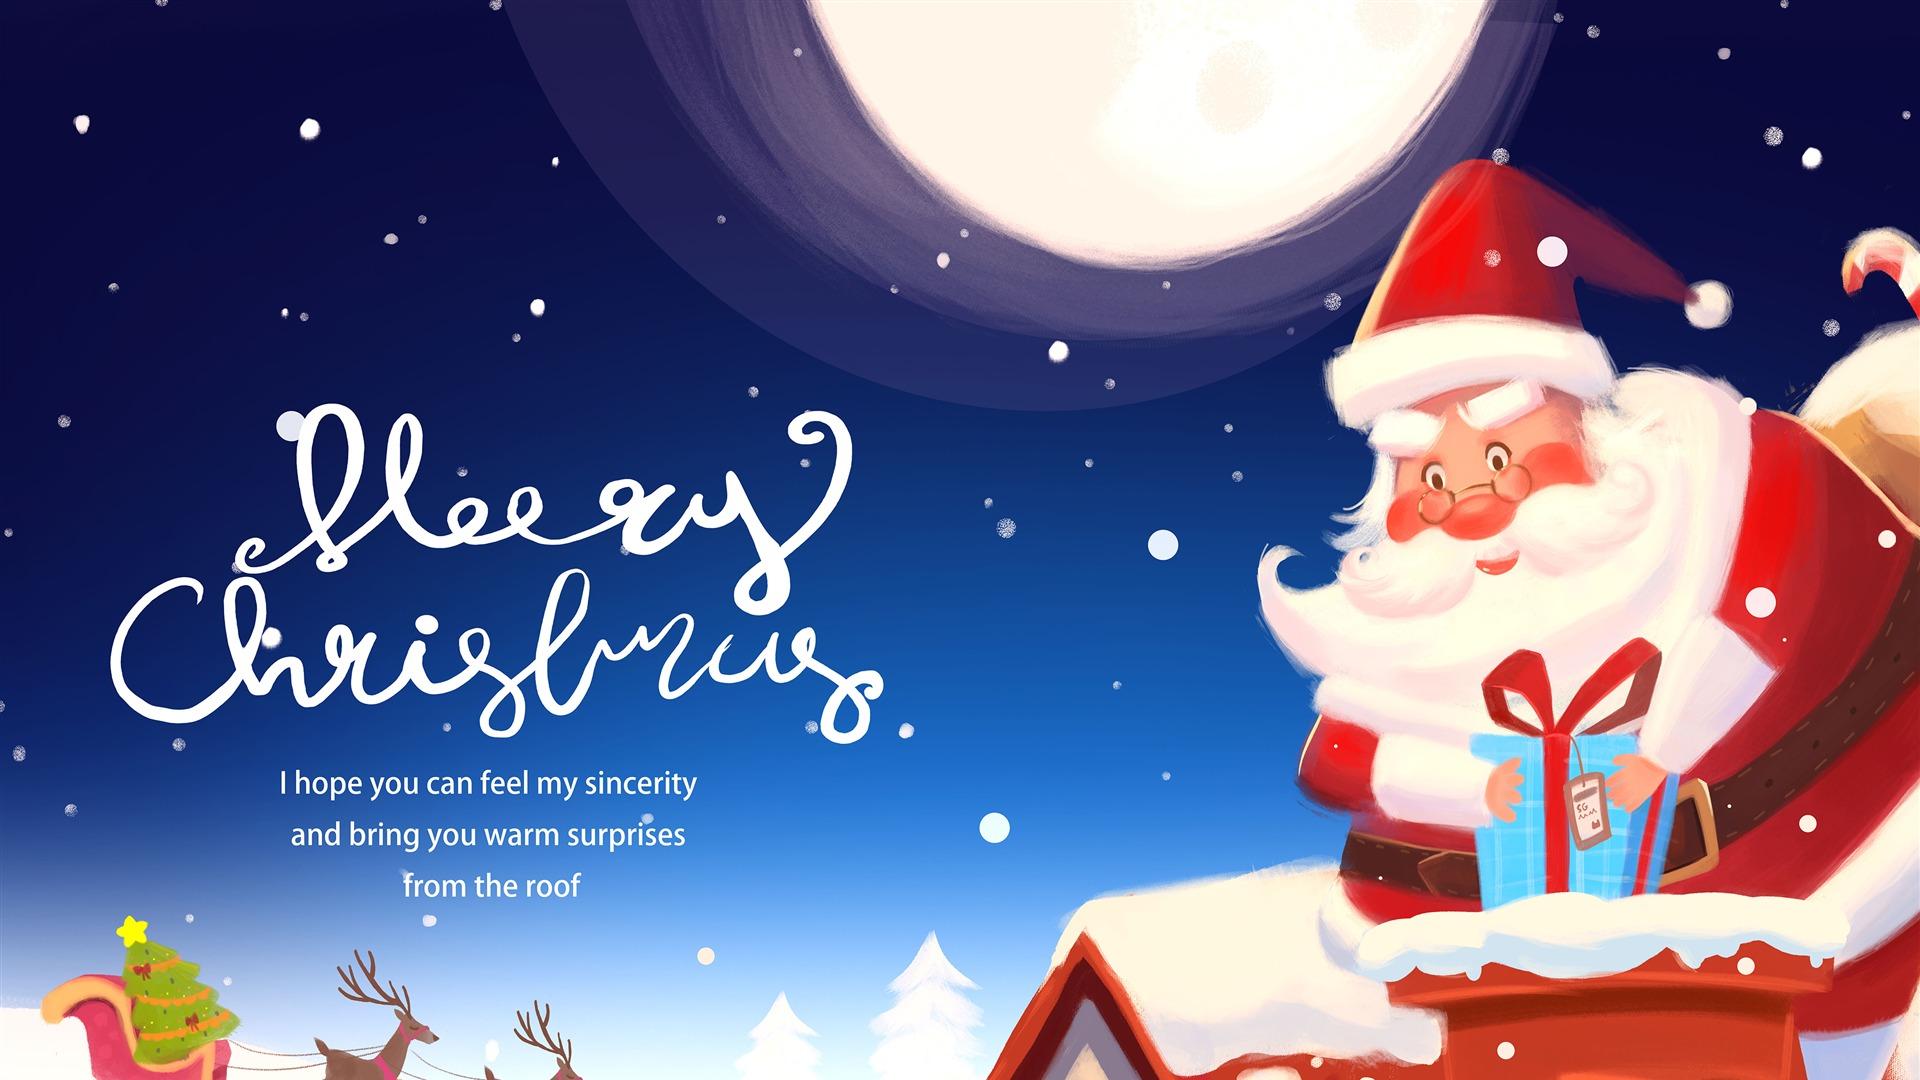 Merry Christmas Greetings Card Picture Wallpaper